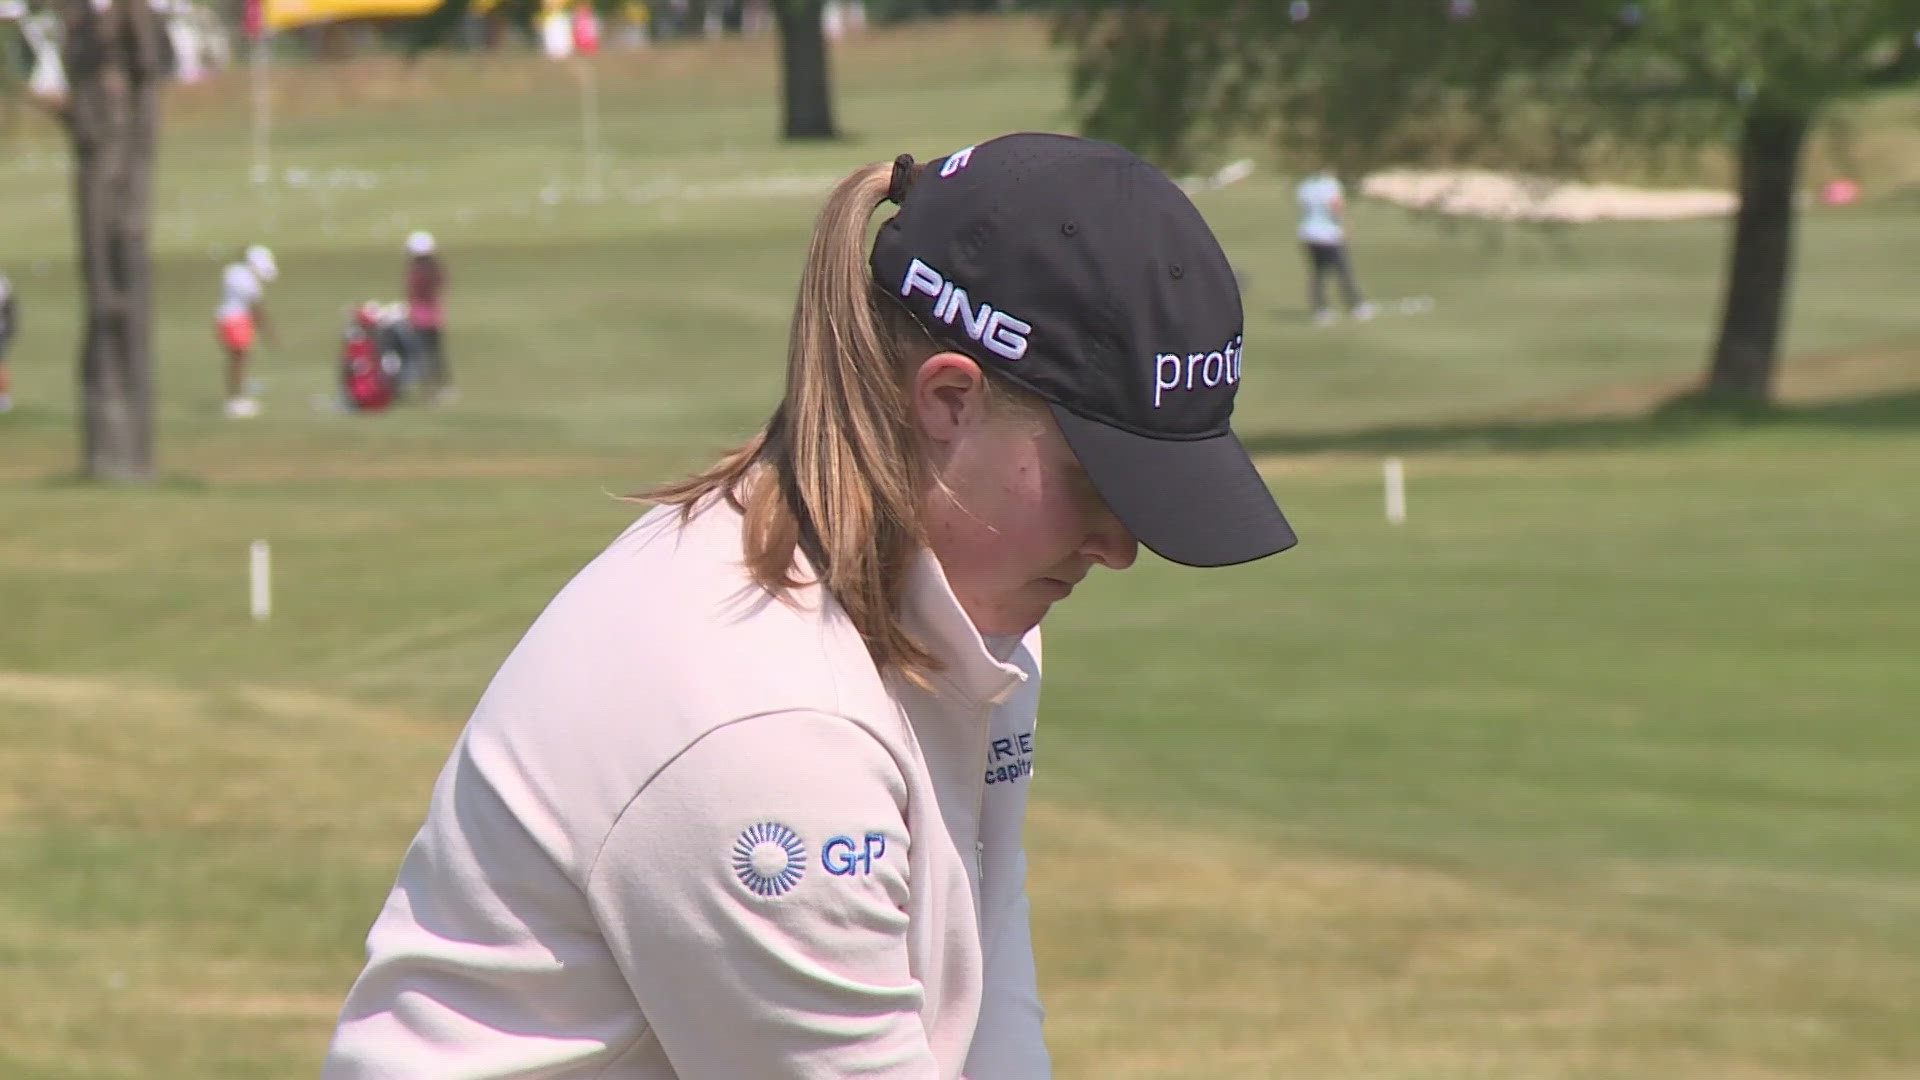 West Michigan is just a few days away from the start of the 2023 Meijer LPGA Classic at the Blythefield Country Club.